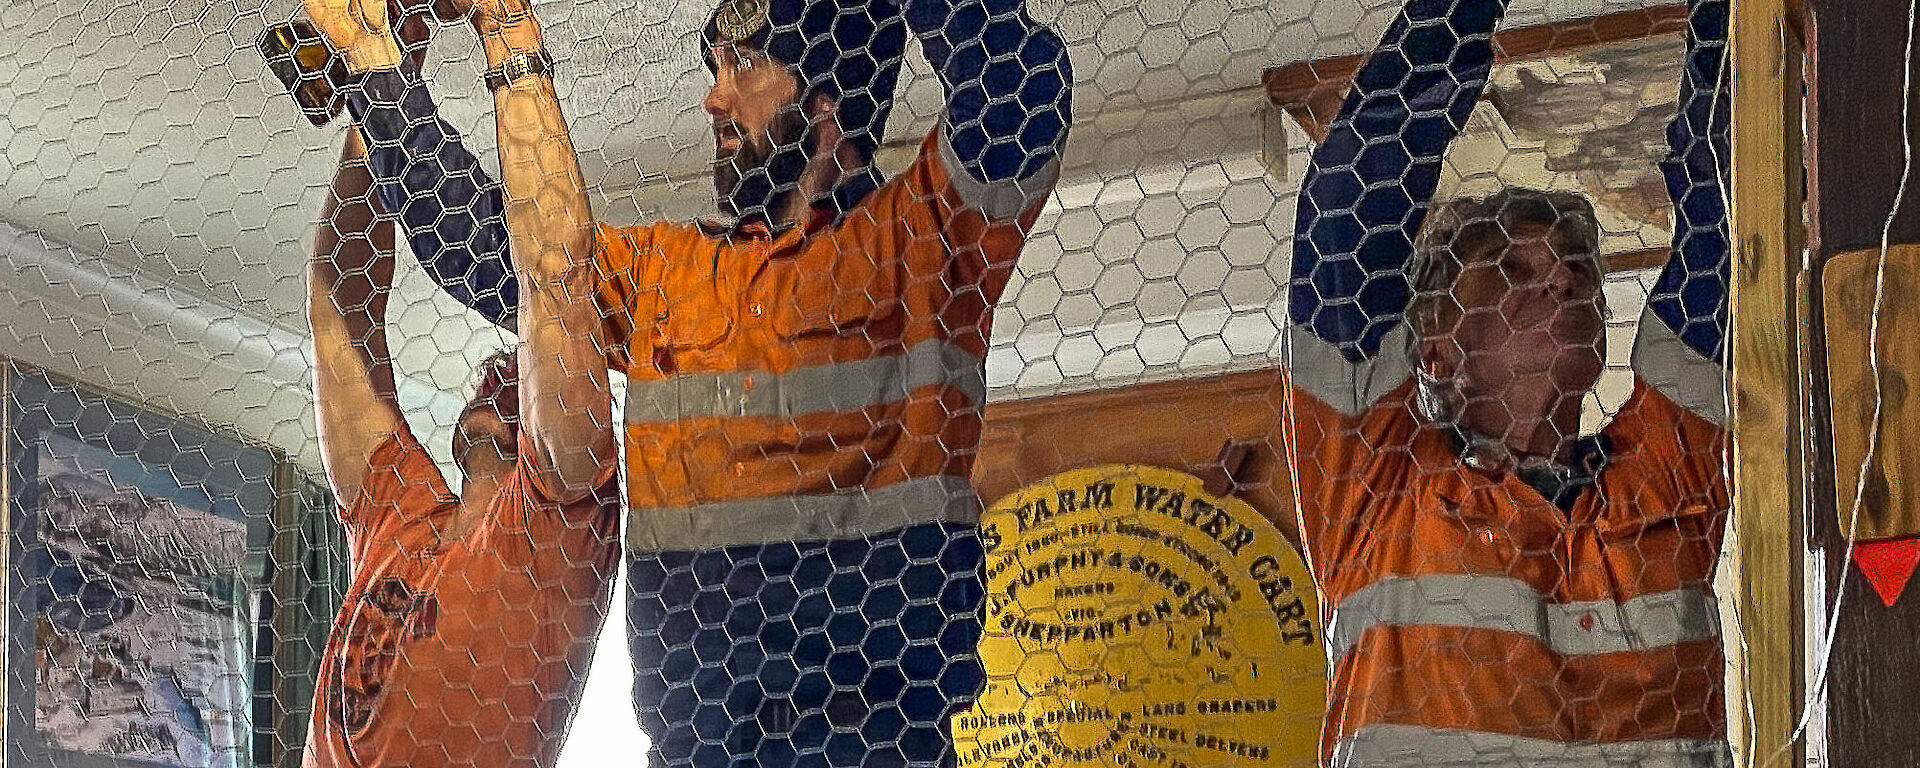 Three tradesmen putting up a chicken wire wall in the Mess